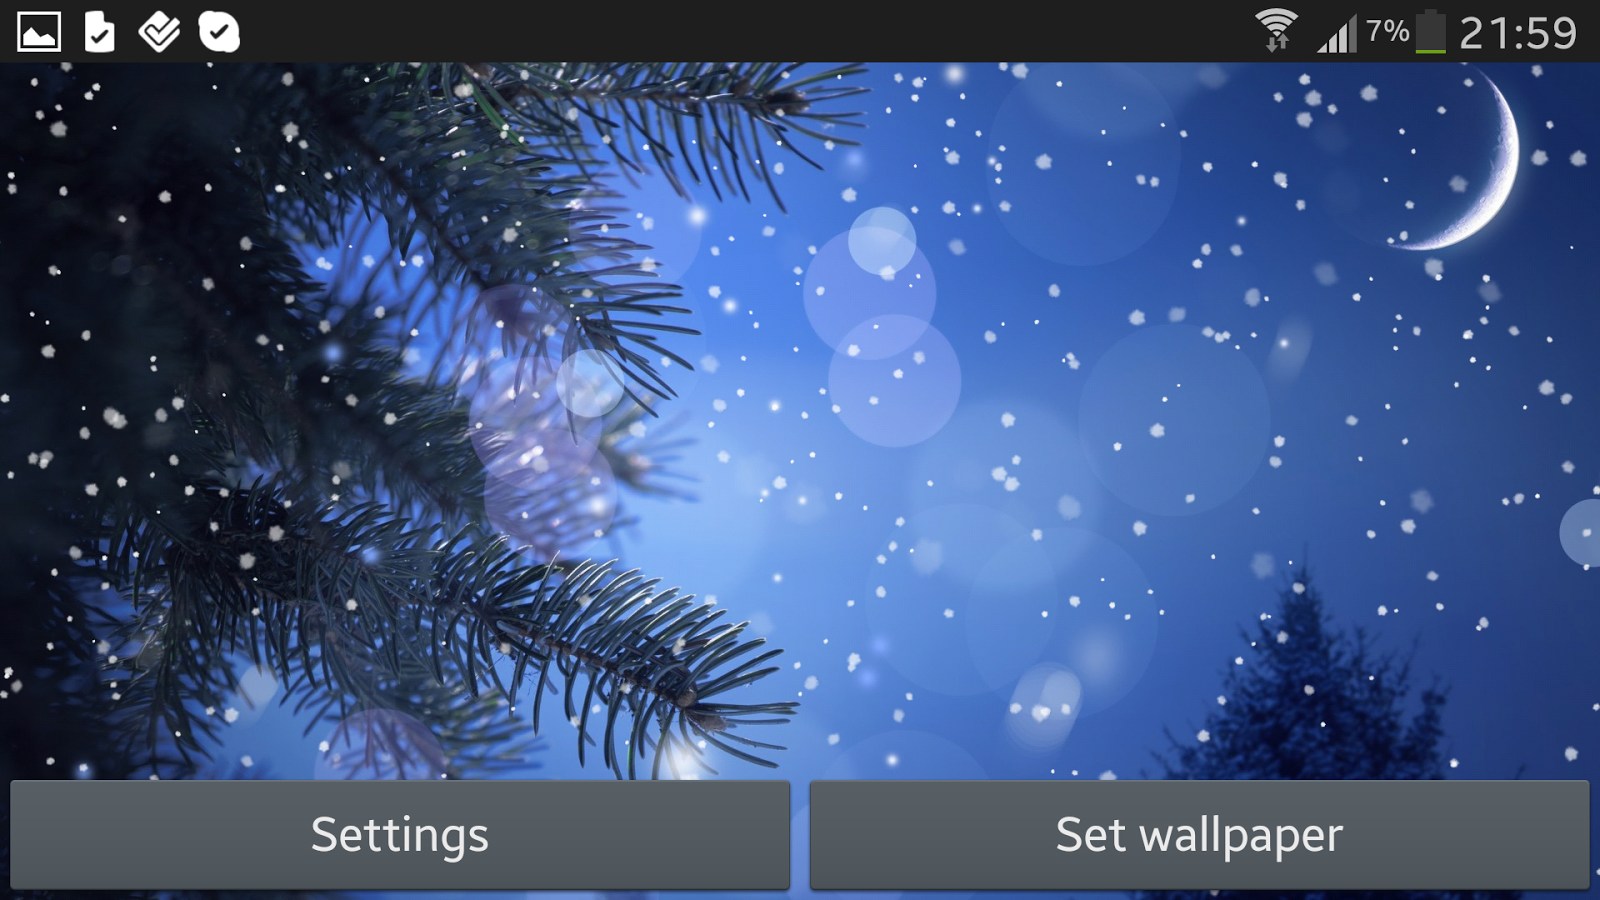 Snowfall Live Wallpaper   Android Apps on Google Play